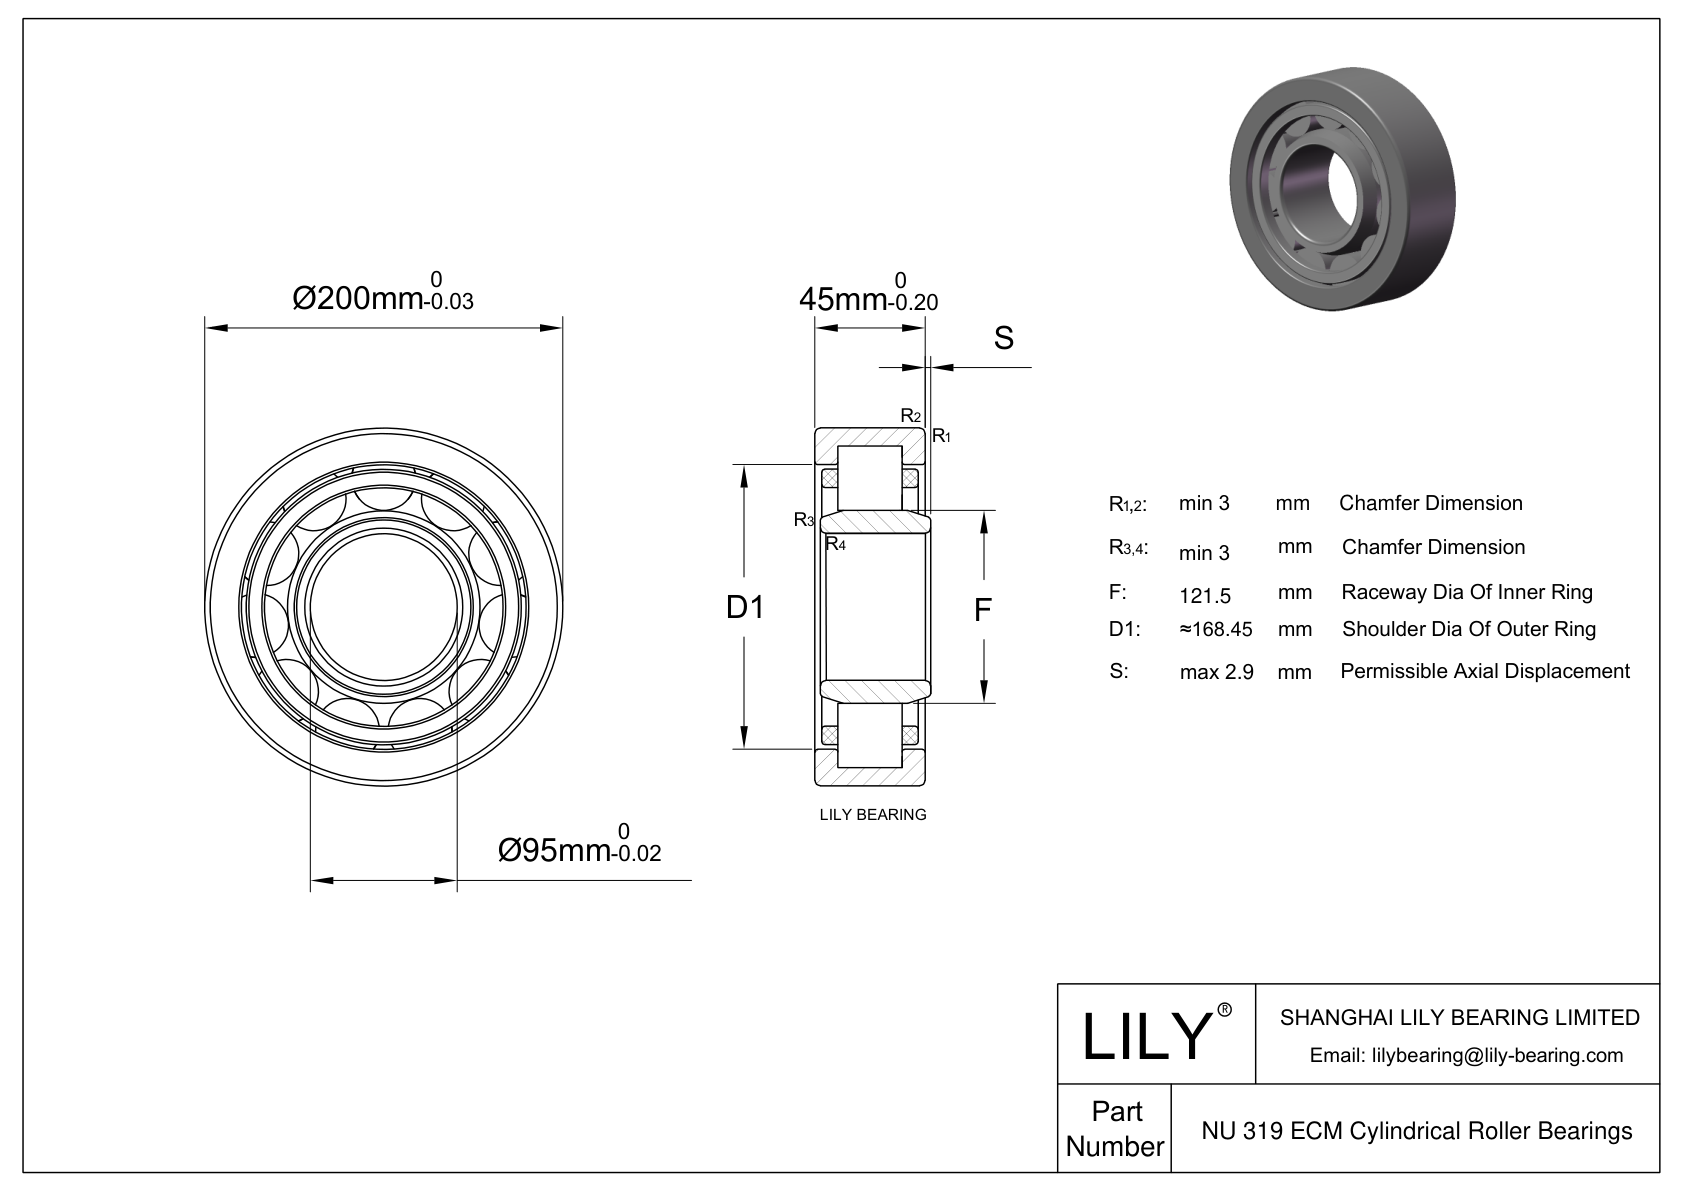 NU 319 ECM/C3VL0241 Ceramic Coated Cylindrical Roller Bearings cad drawing